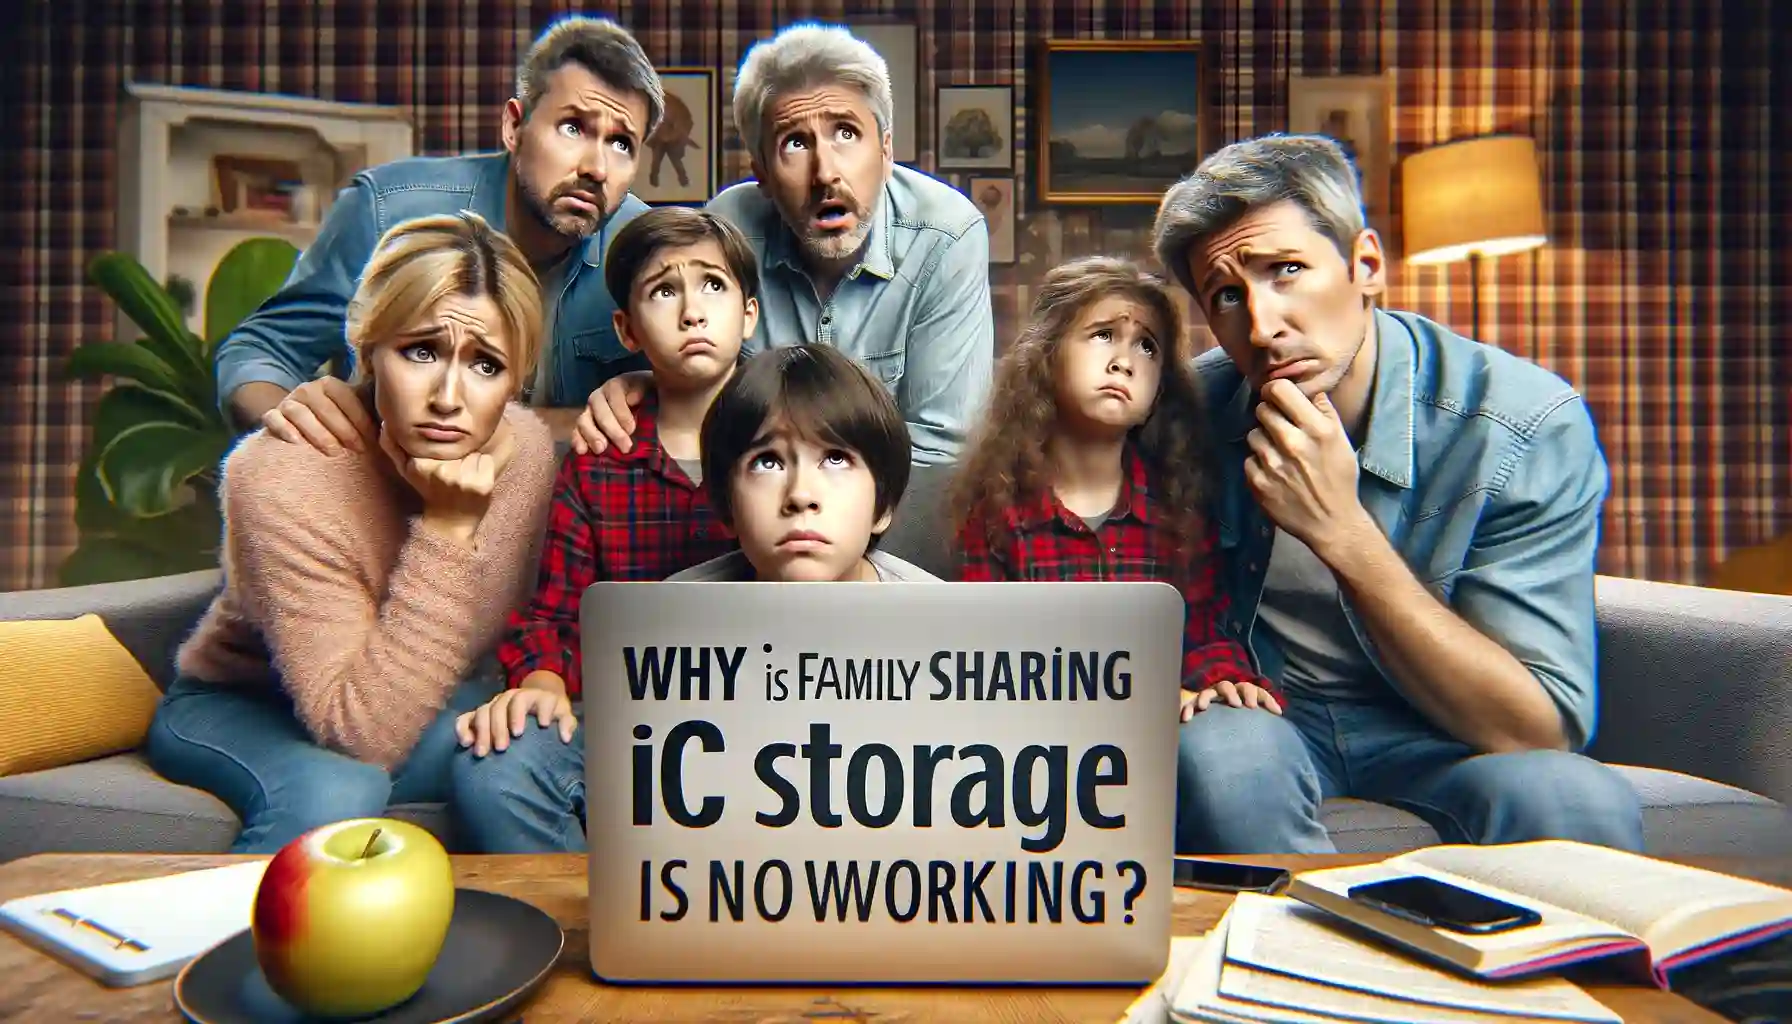 Why is Family Sharing iCloud Storage Not Working?